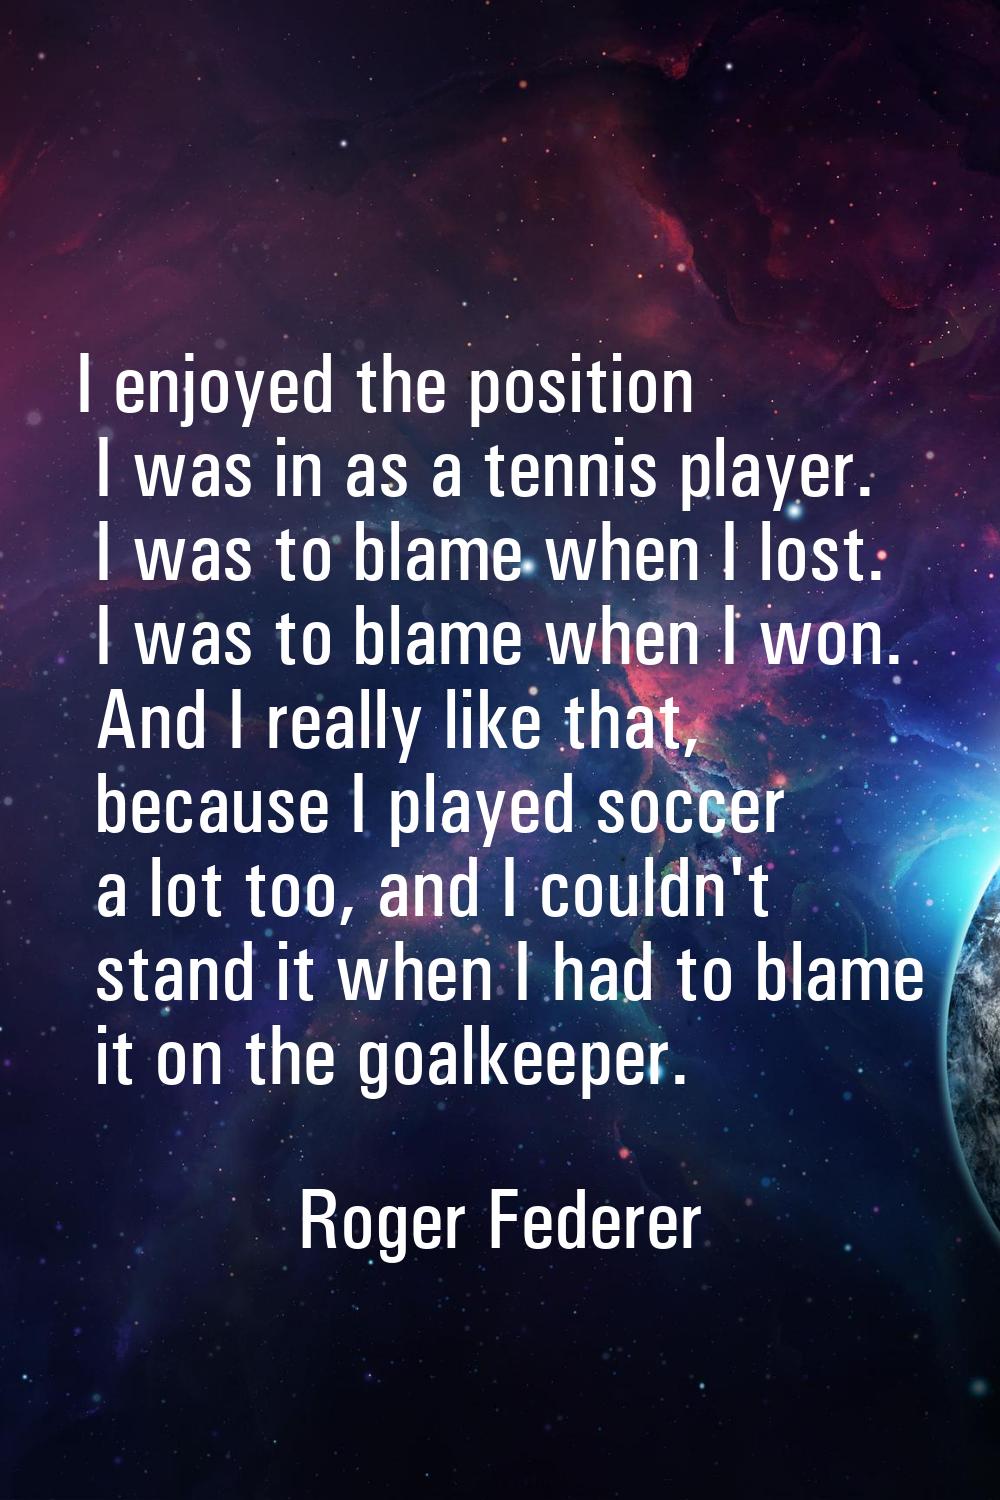 I enjoyed the position I was in as a tennis player. I was to blame when I lost. I was to blame when